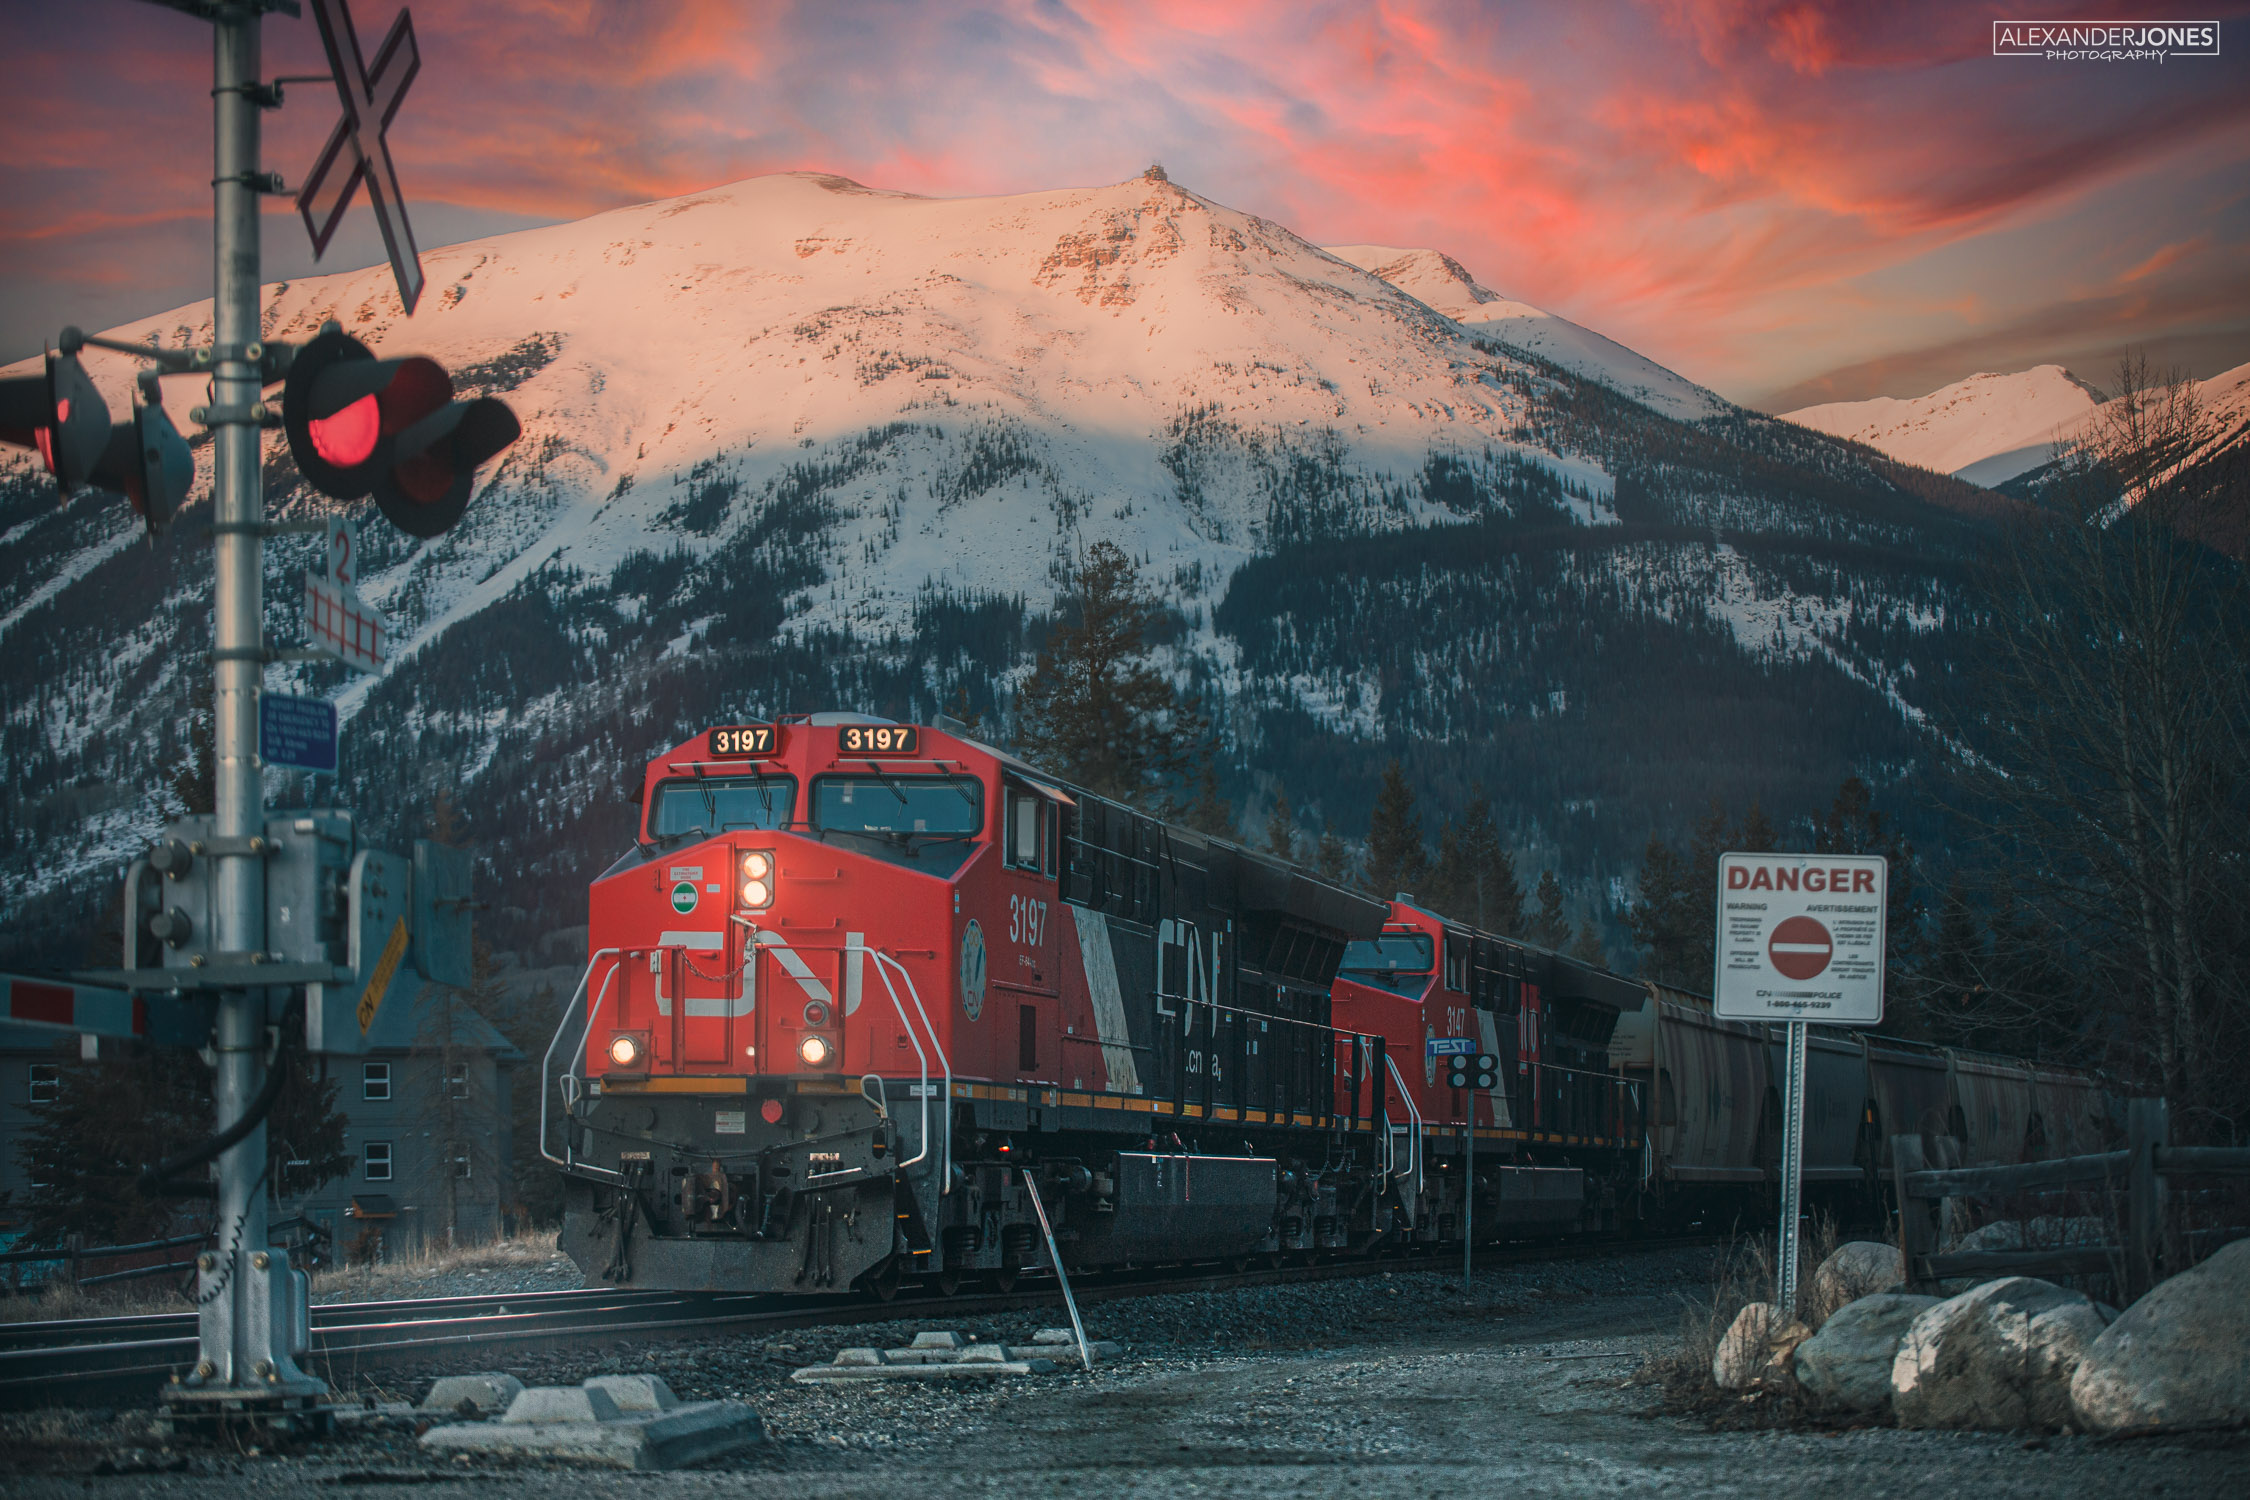 A CN train during sunrise in front of a snowcapped Whitstler's Mountain and the Jasper Skytram in Jasper National Park on a summer morning.